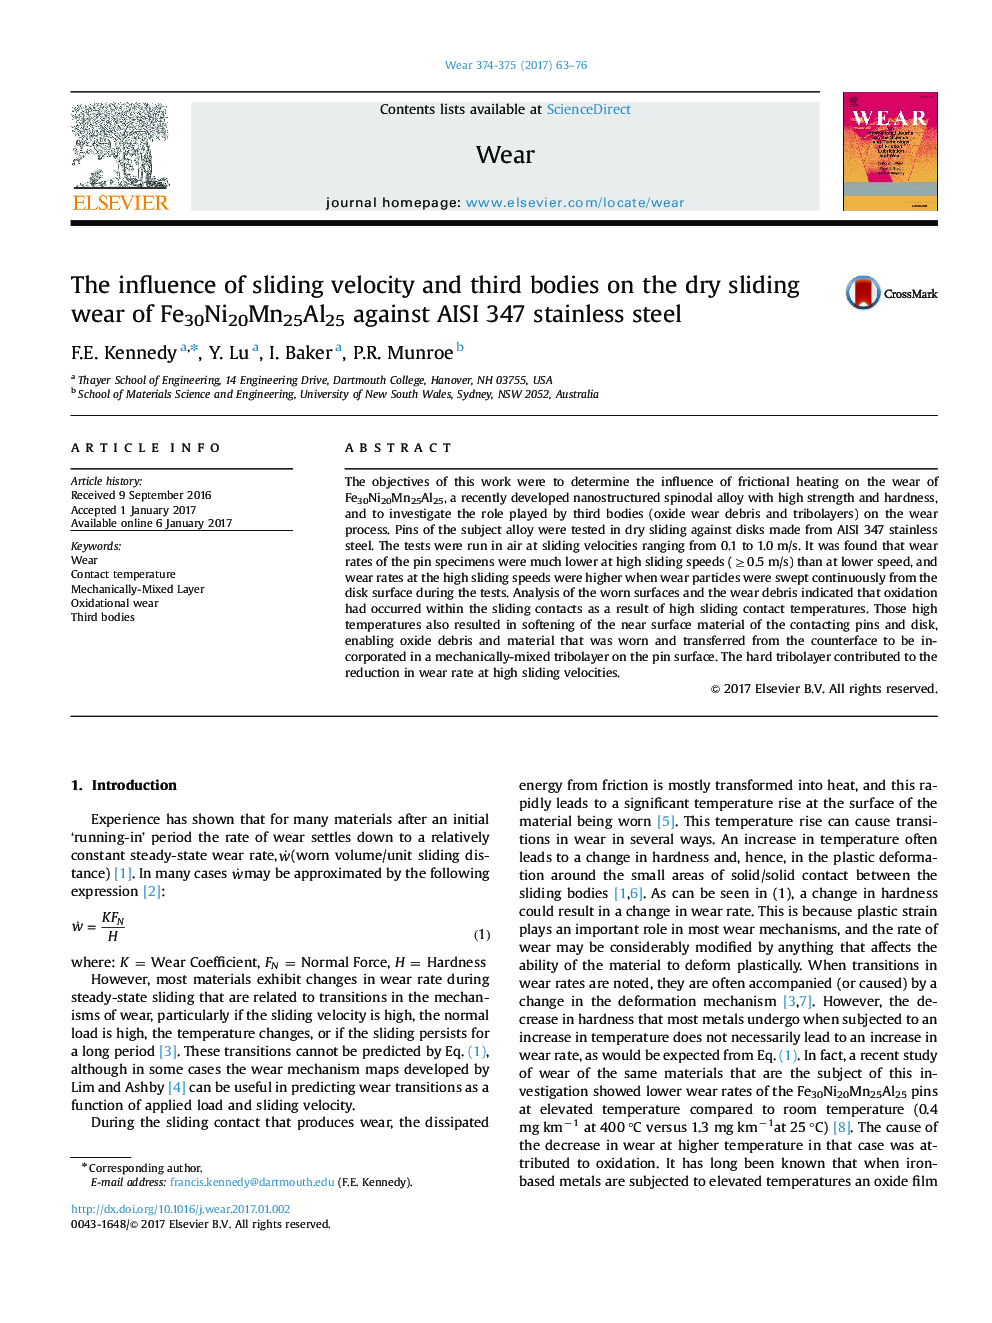 The influence of sliding velocity and third bodies on the dry sliding wear of Fe30Ni20Mn25Al25 against AISI 347 stainless steel